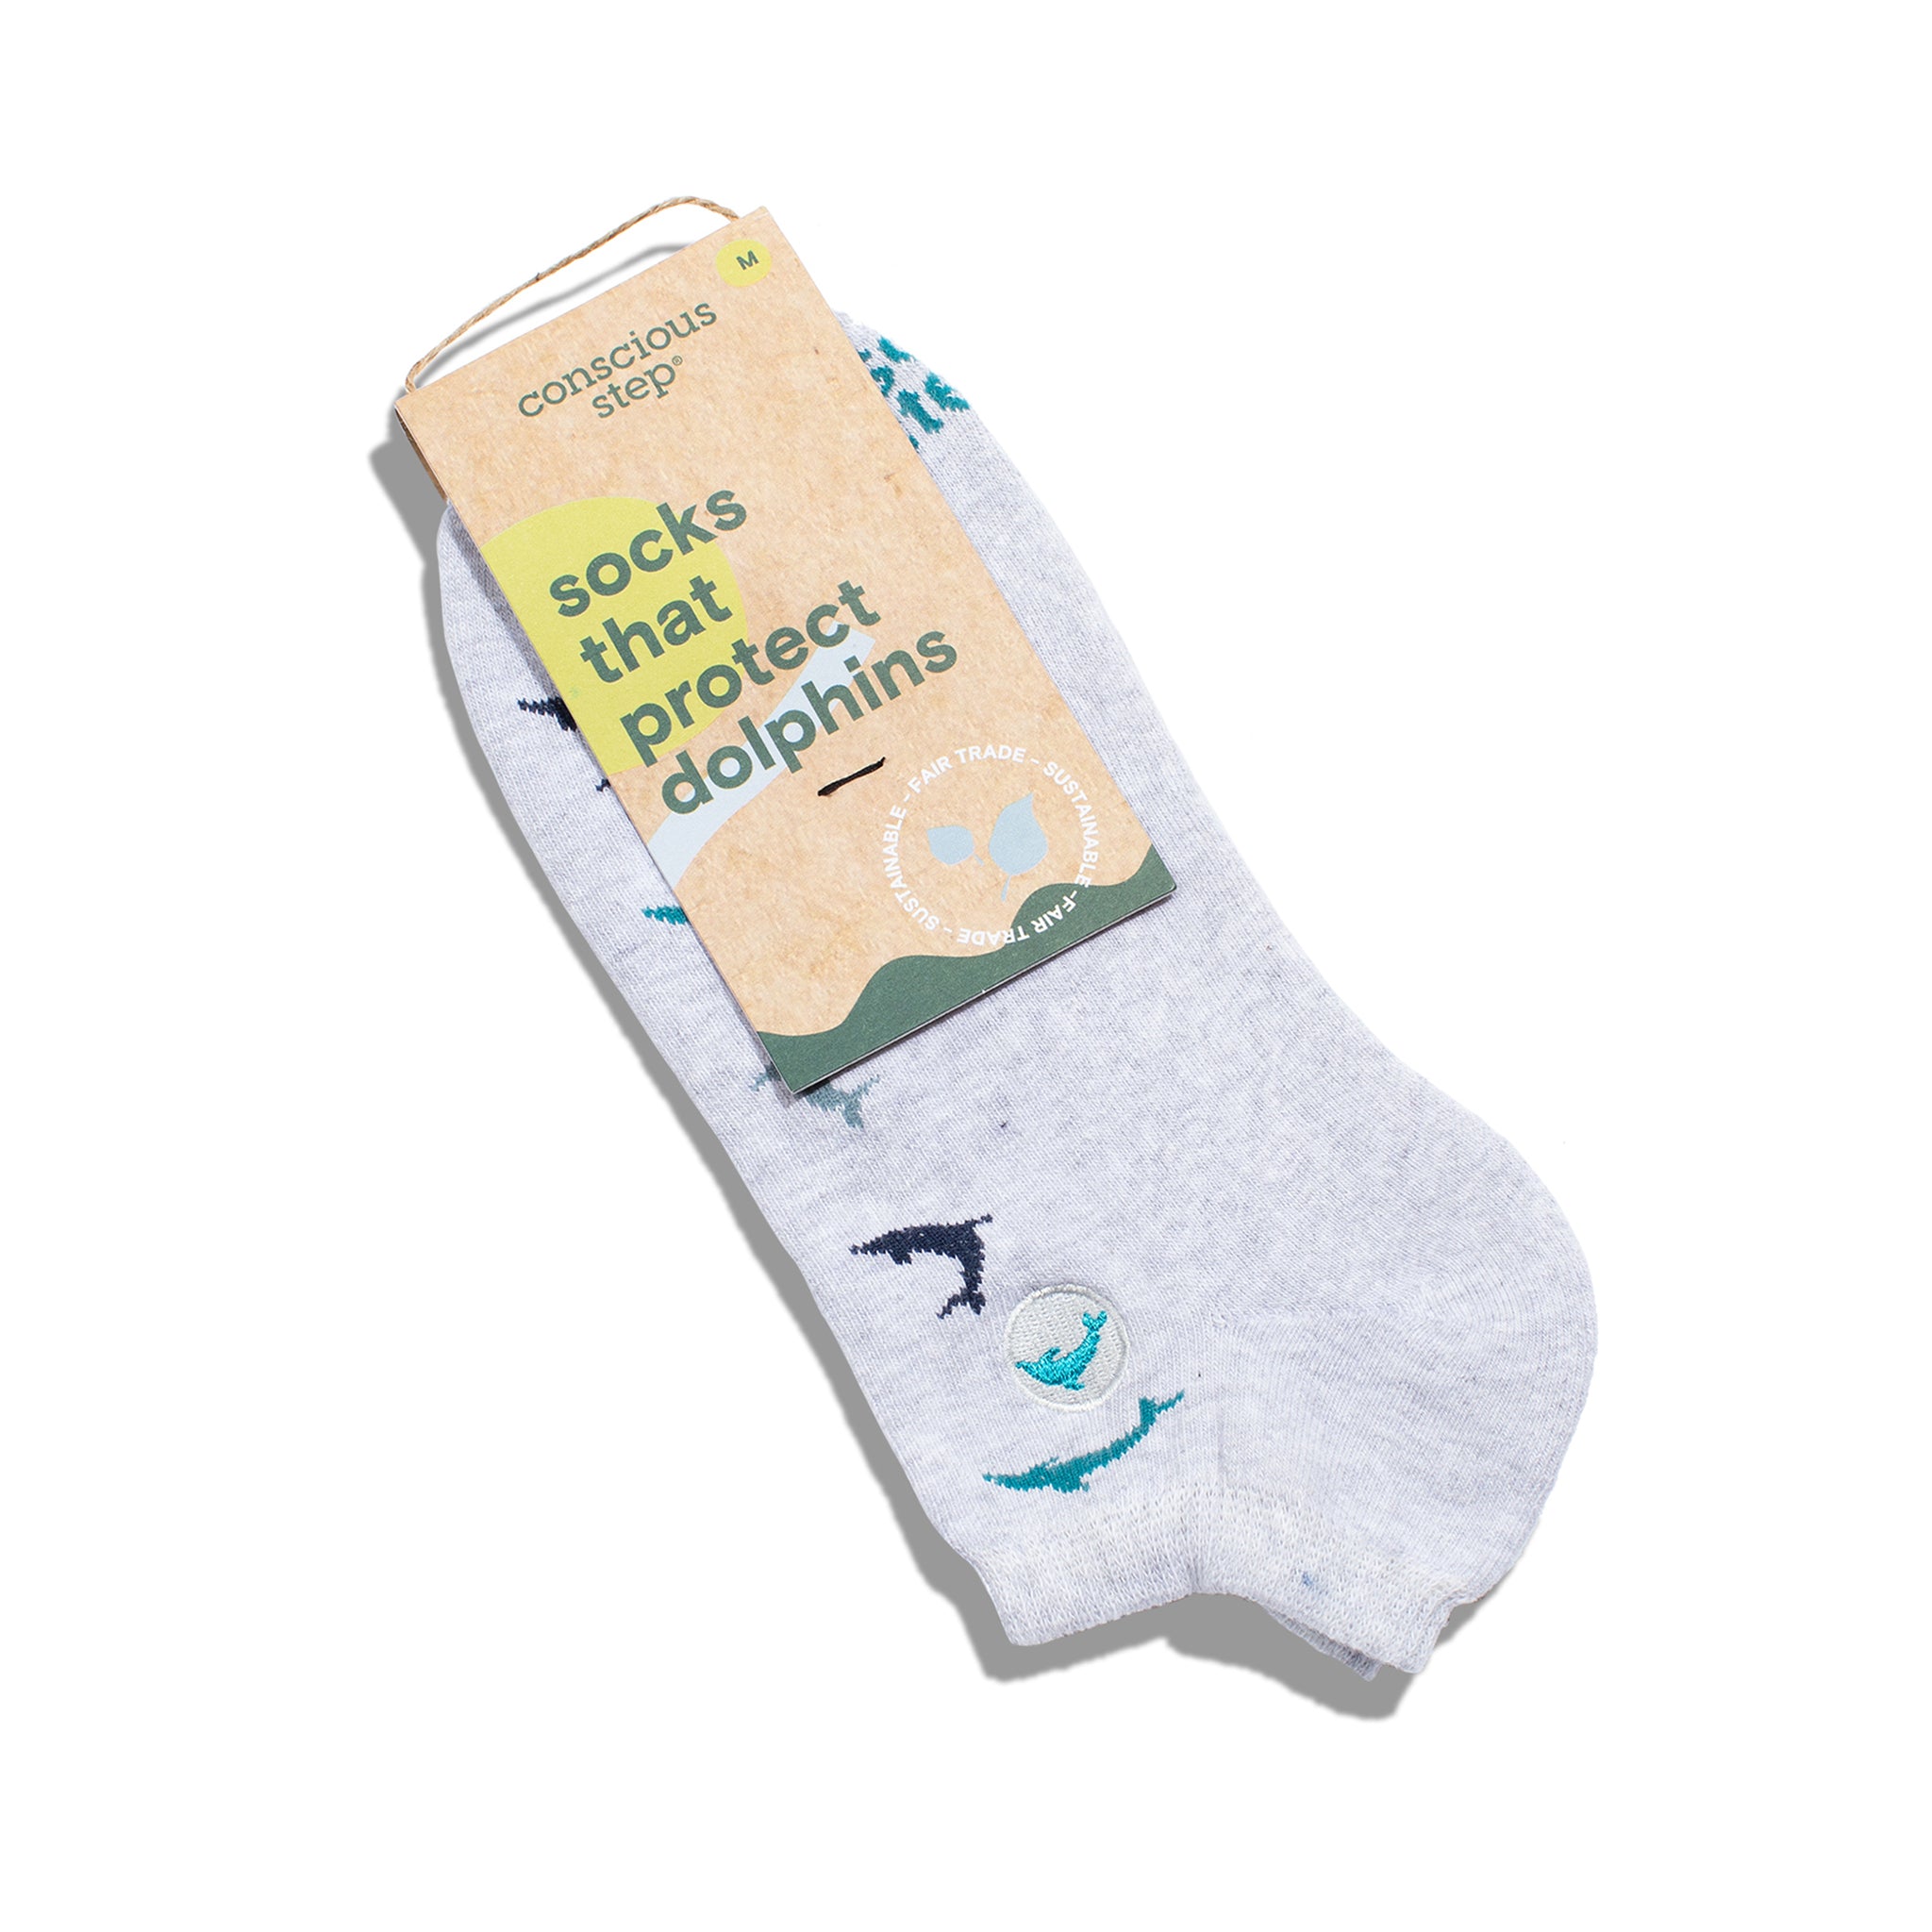 Socks that Restore Oceans | Eco-friendly & Donate to a Cause ...